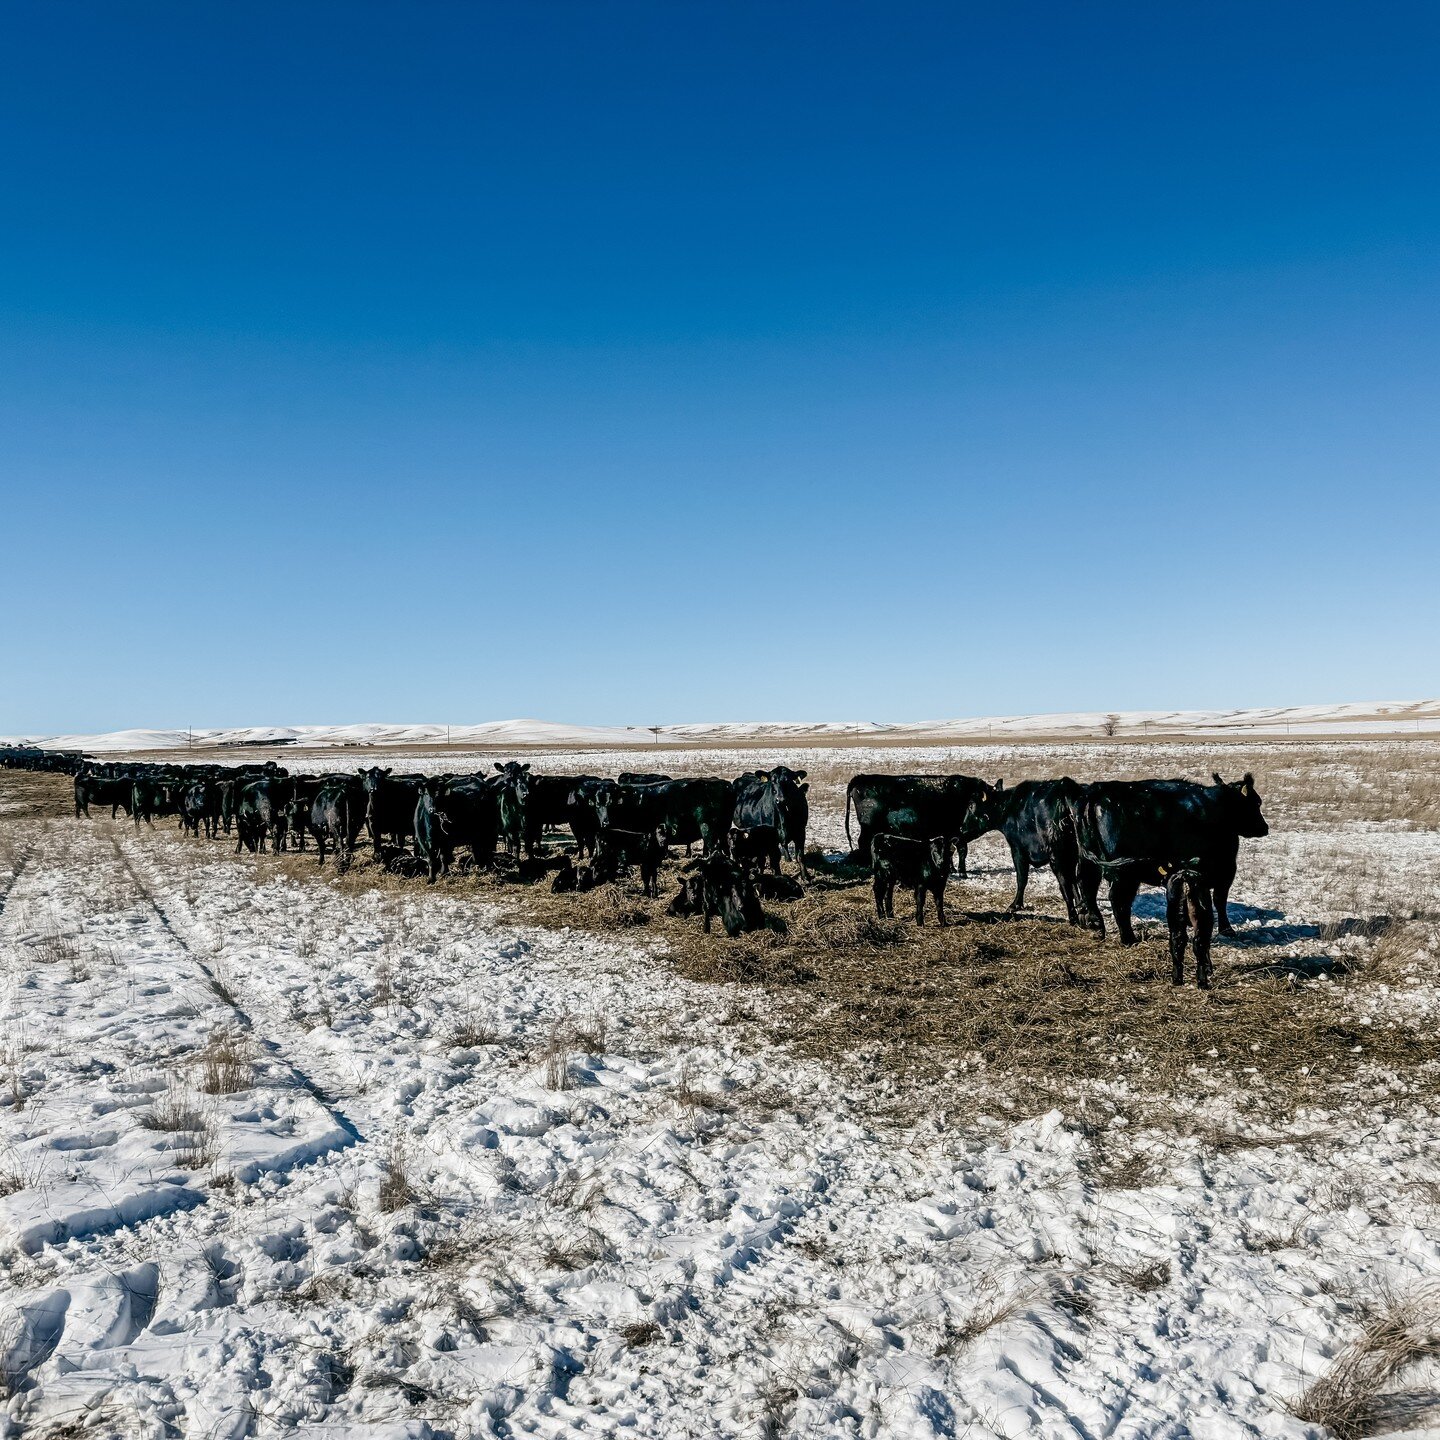 Me: &quot;What are the chances of finding Lucky out here?&quot; 

Him: &quot;Who's Lucky?&quot;

Me: Sigh. &quot;The calf we saved when it was -35&deg;?&quot;

Him: &quot;Oh yeah, he would be hard to find out here. But he's doing good.&quot;

And the